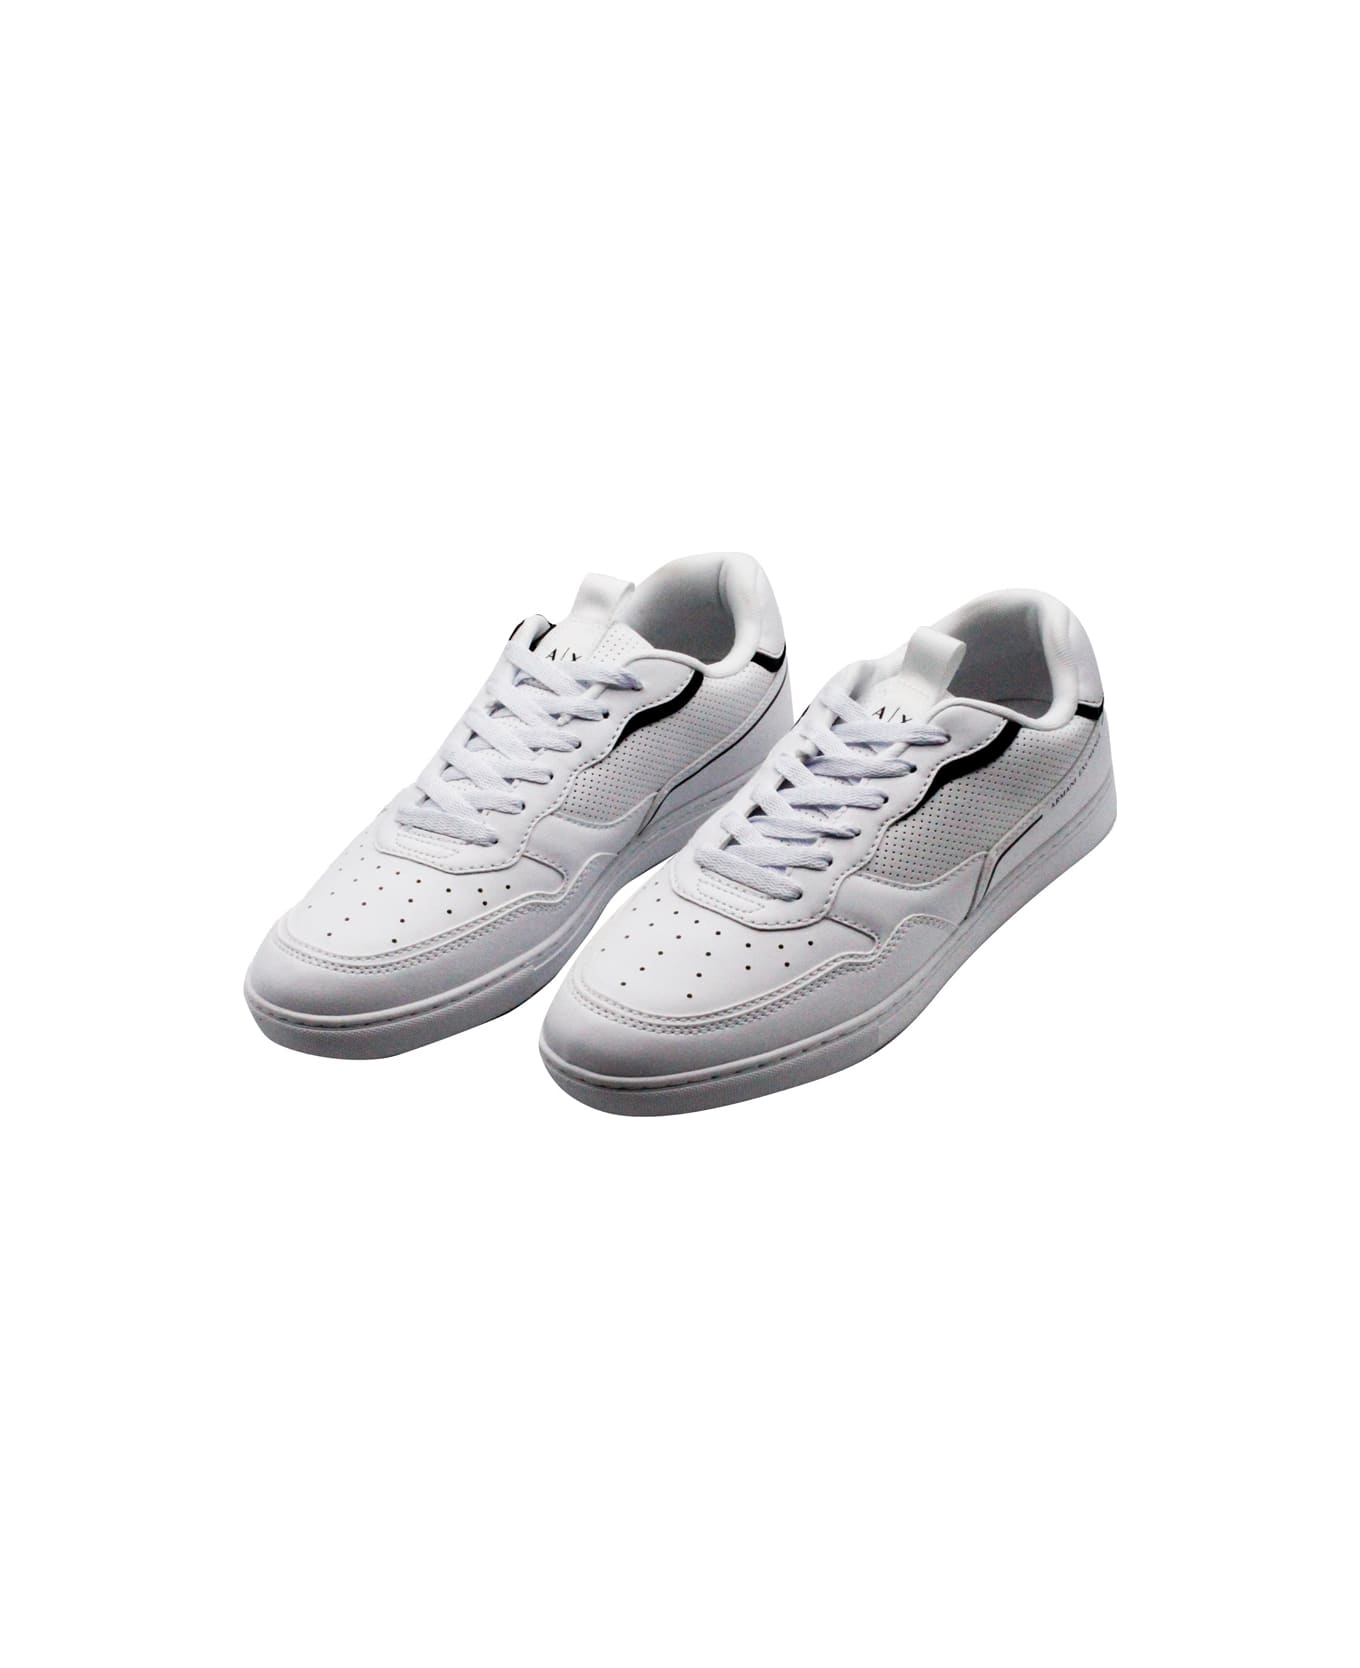 Armani Collezioni Sneakers In Soft Perforated Leather With Matching Sole And Lace Closure. Rear Logo - White